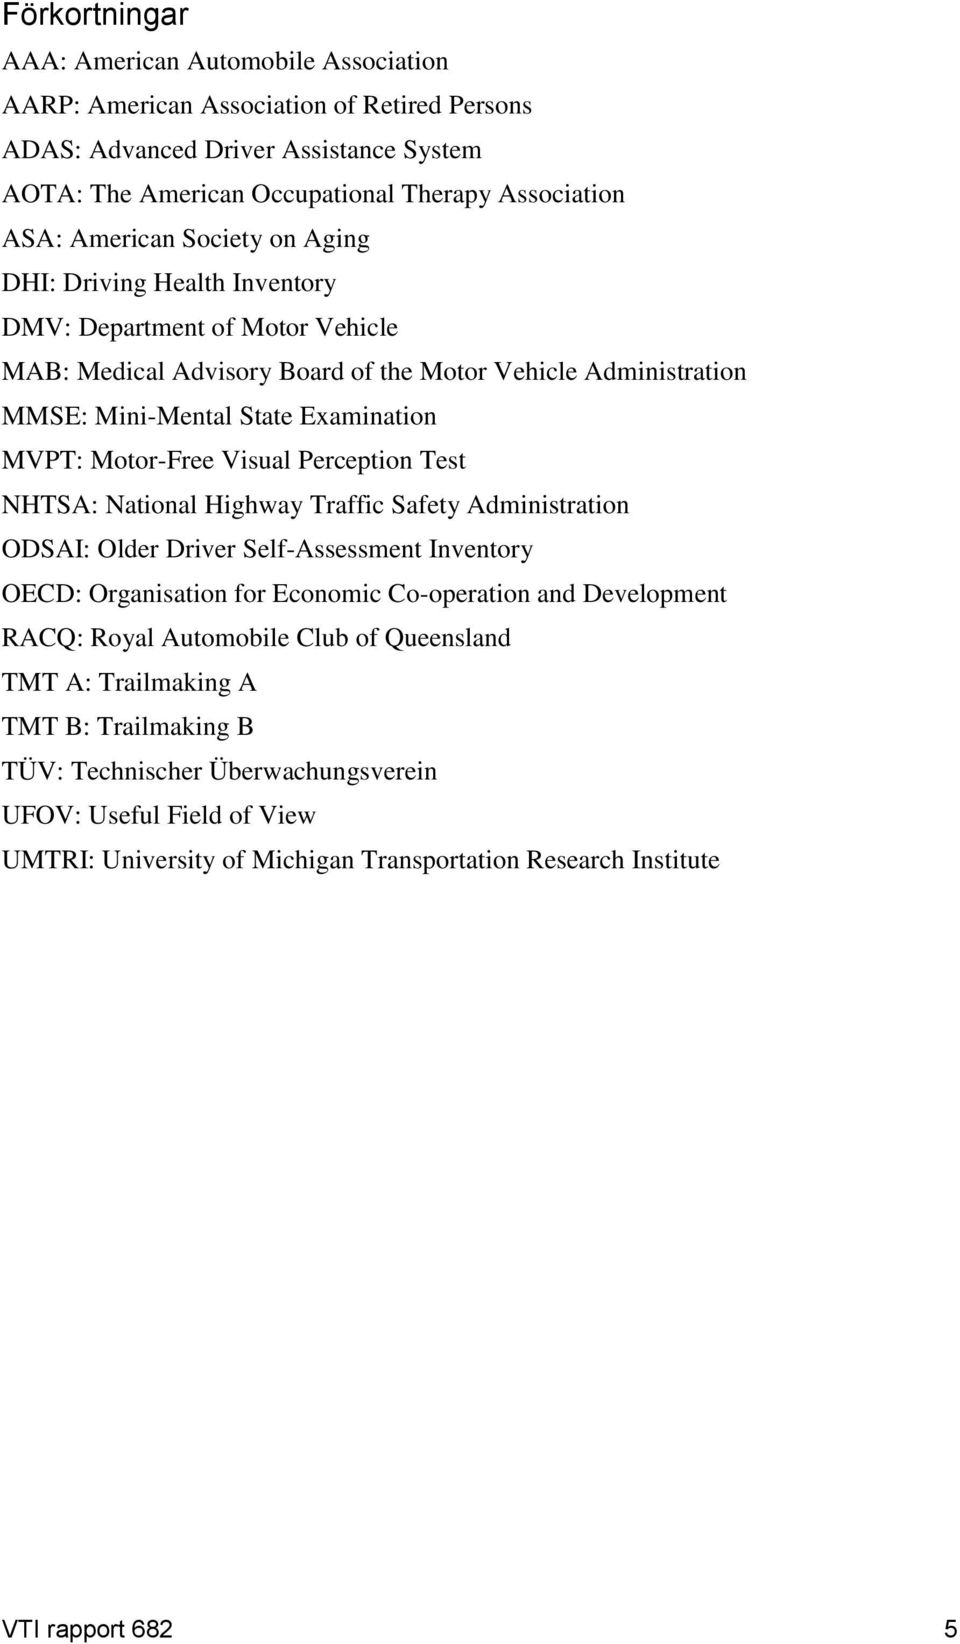 Motor-Free Visual Perception Test NHTSA: National Highway Traffic Safety Administration ODSAI: Older Driver Self-Assessment Inventory OECD: Organisation for Economic Co-operation and Development